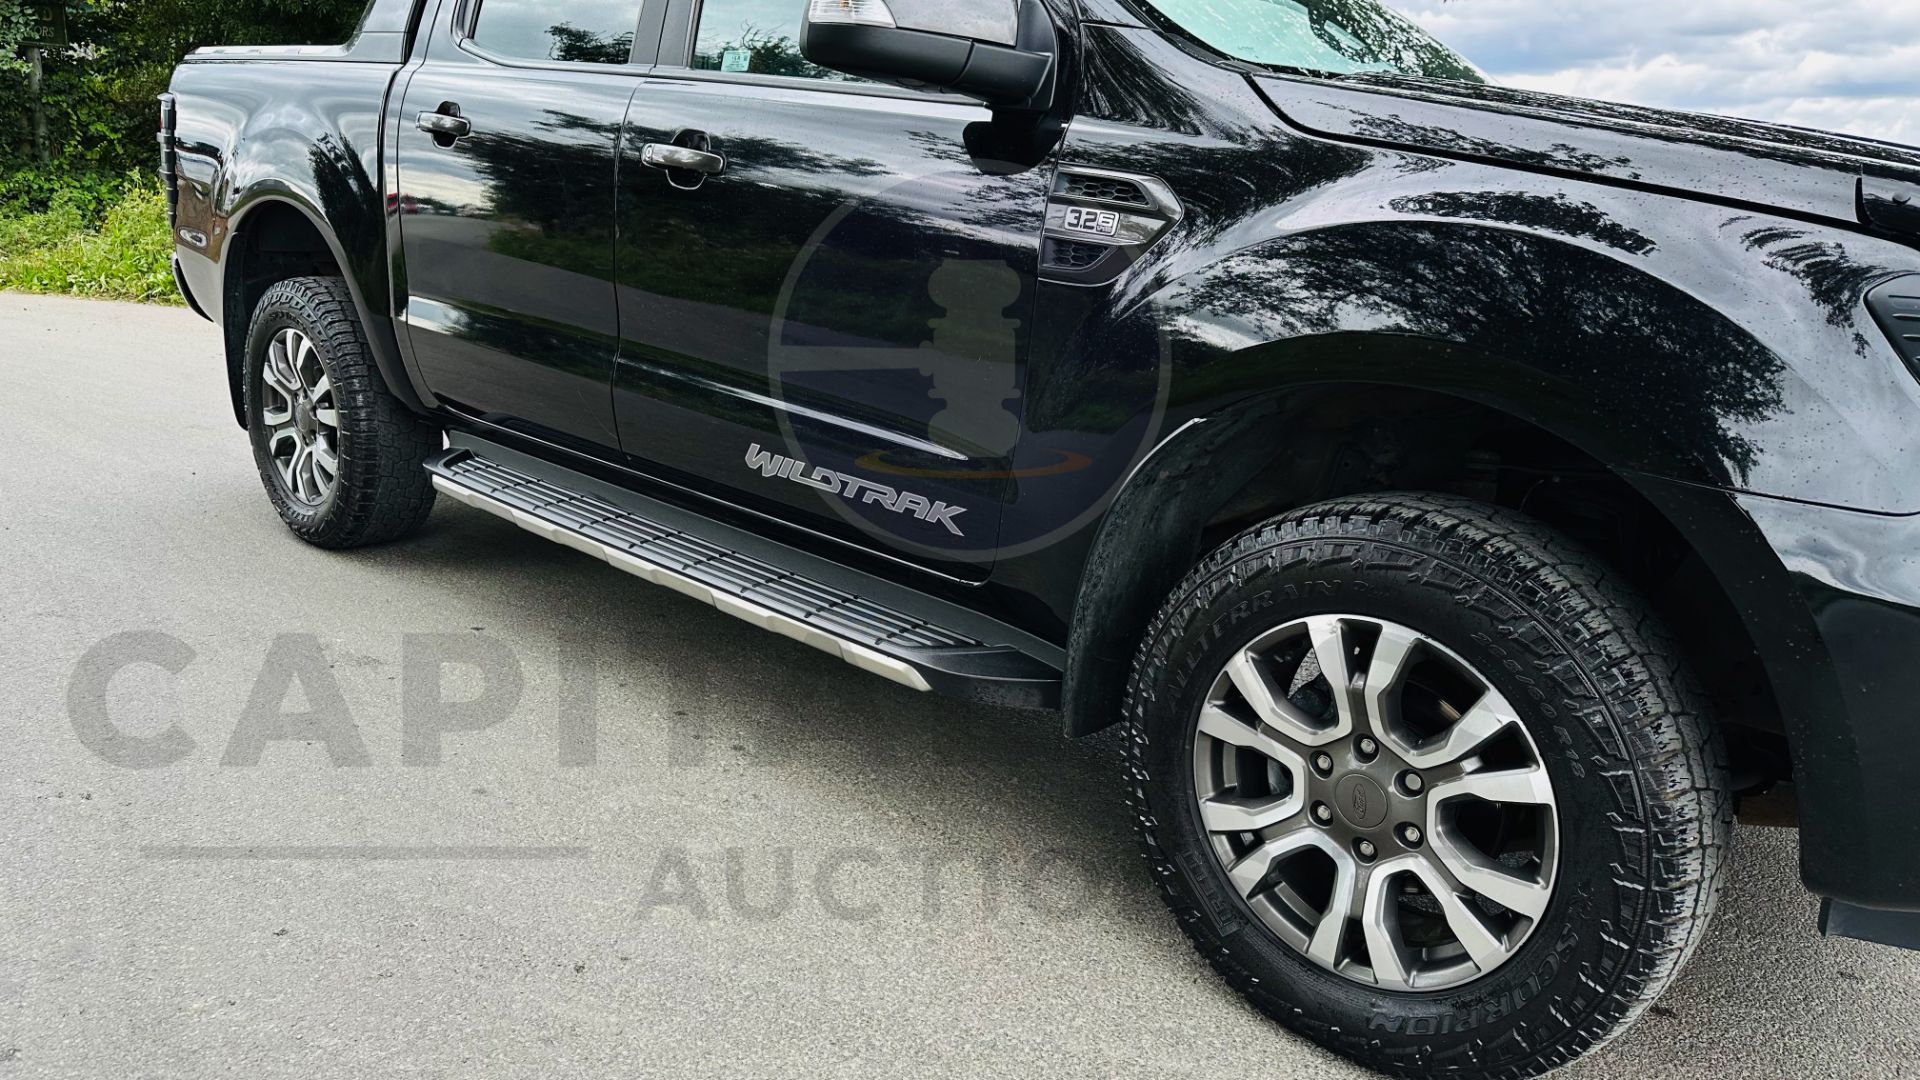 (On Sale) FORD RANGER *WILDTRAK* DOUBLE CAB PICK-UP (2019 - EURO 6) 3.2 TDCI - STOP/START (1 OWNER) - Image 15 of 50